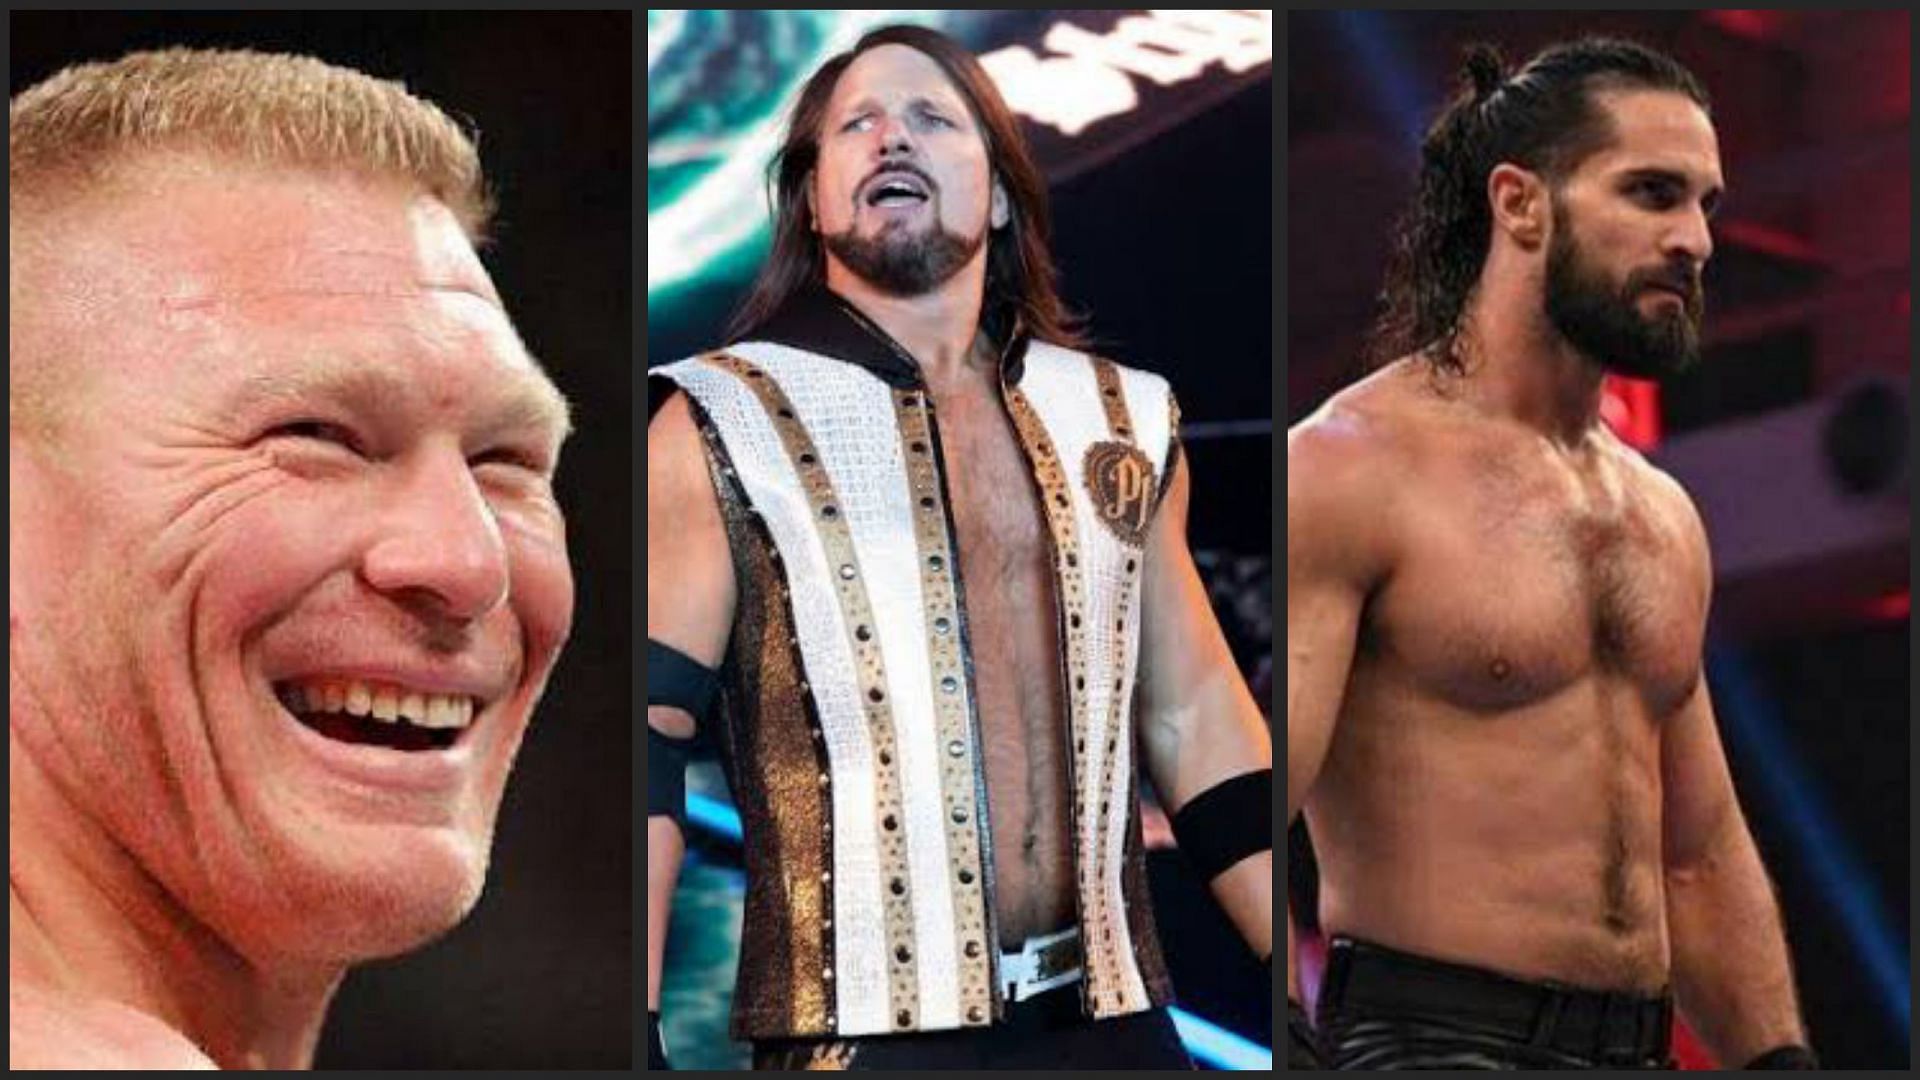 All six superstars have valid reasons to win the WWE Championship